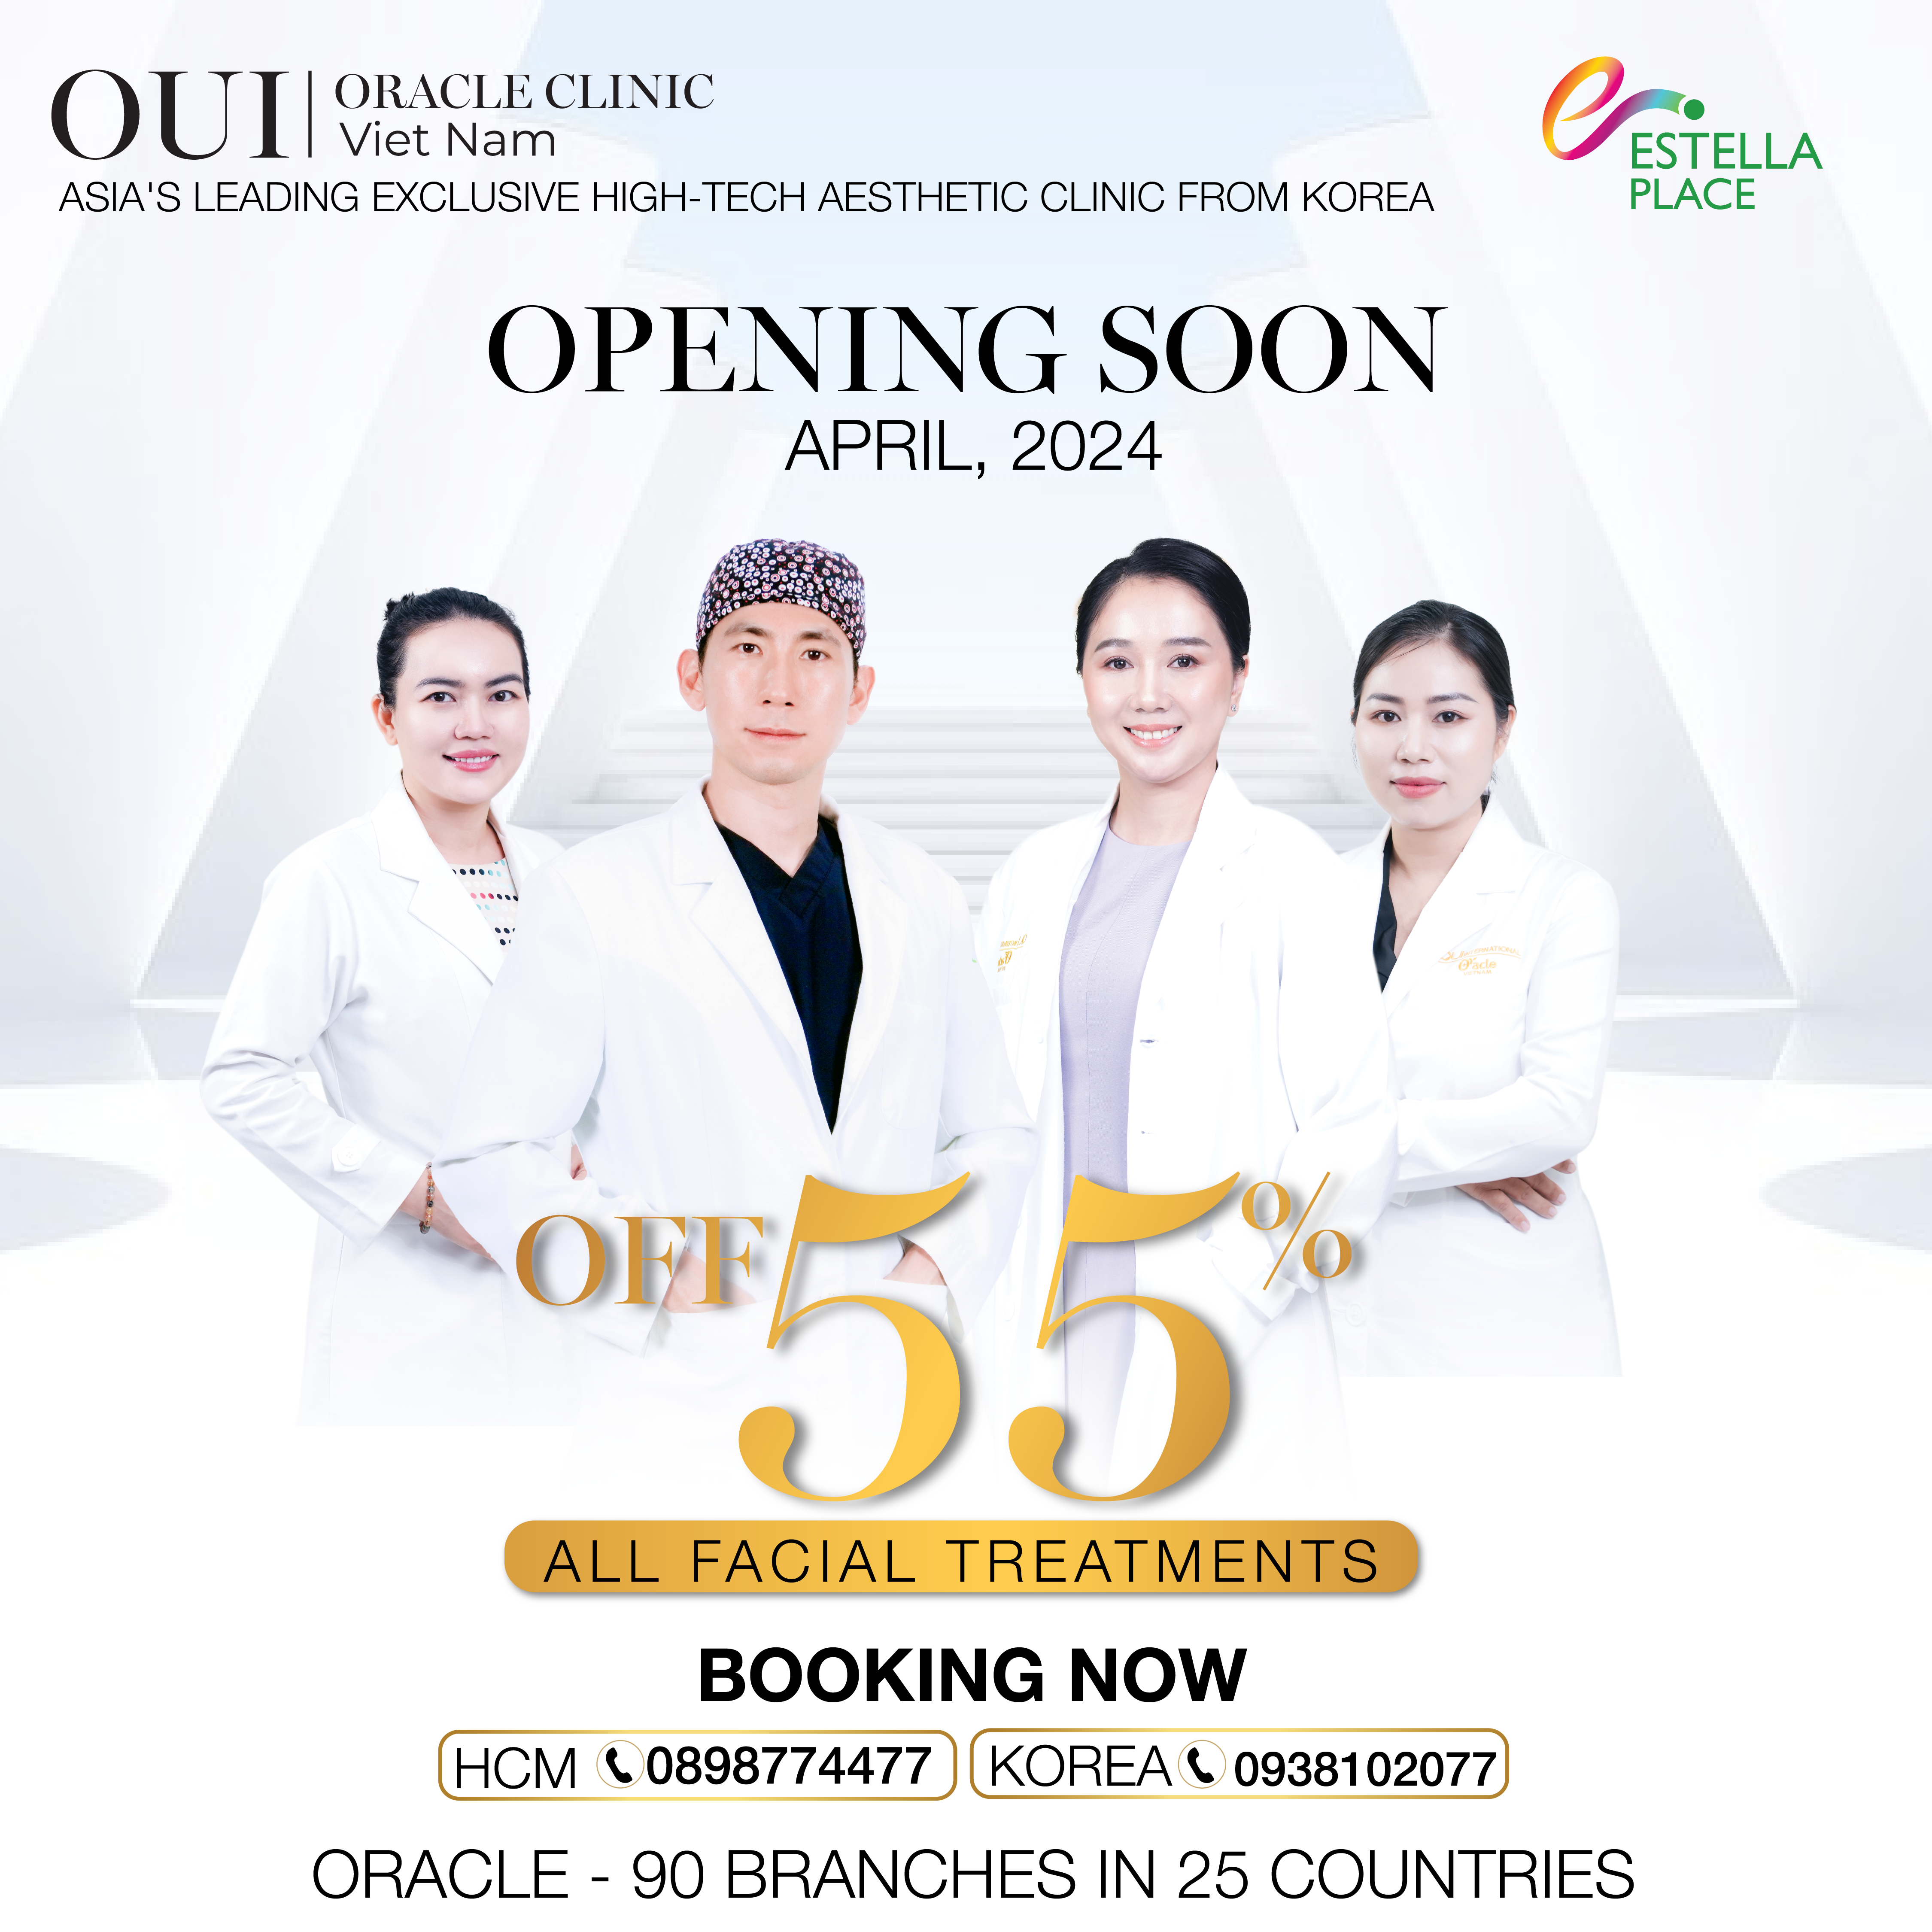 55% DISCOUNT ON THE OCCASION OF THE BRAND OPENING OUI - ORACLE CLINIC VIETNAM AT ESTELLA PLACE